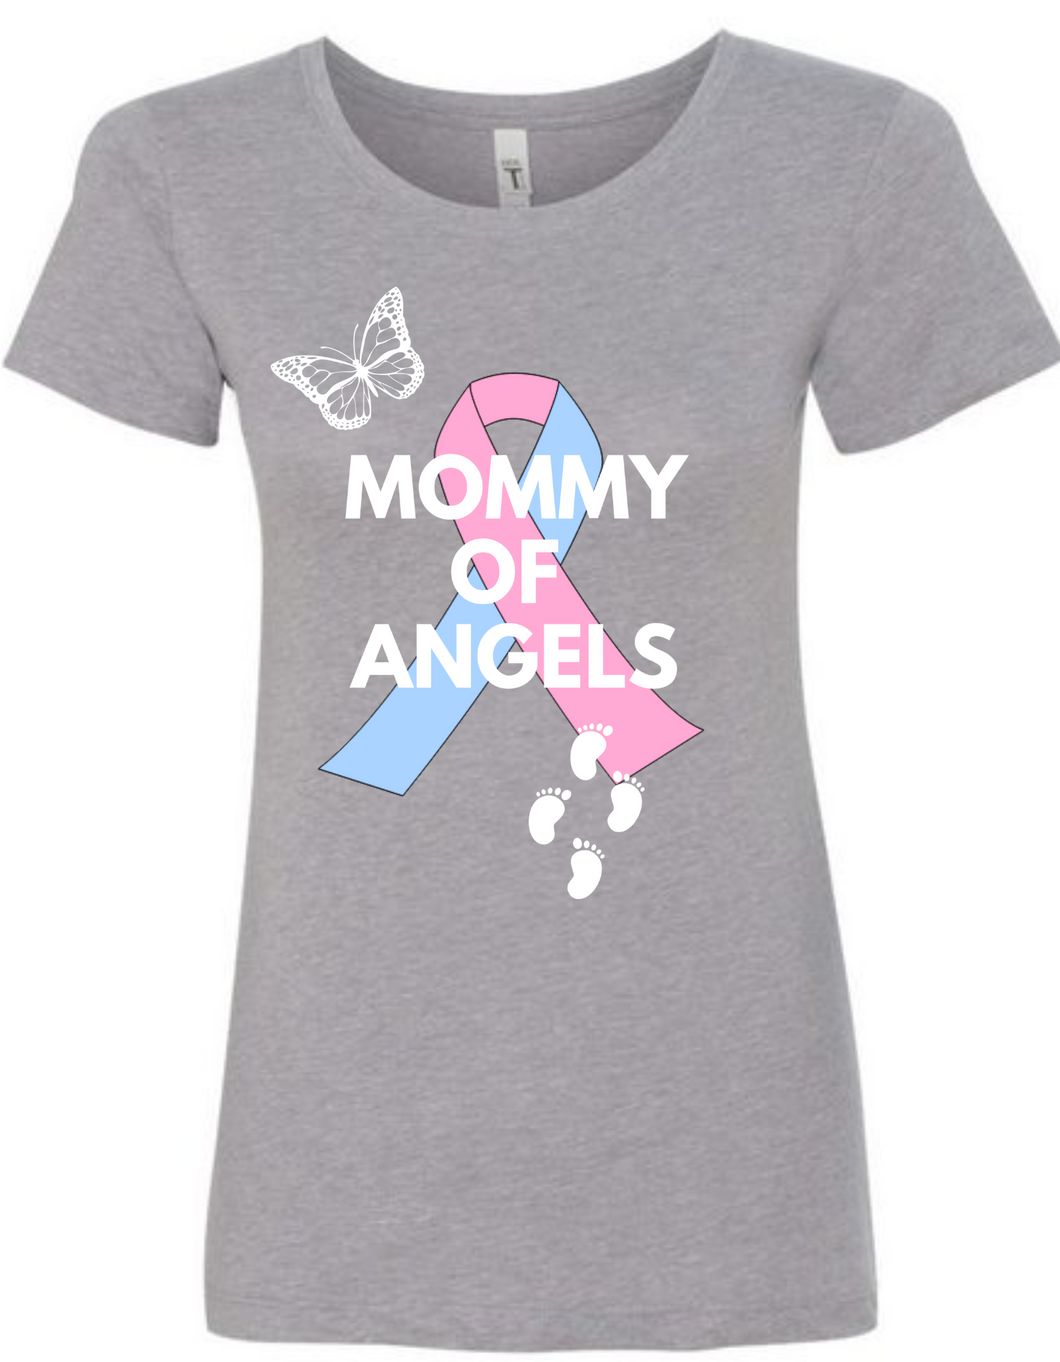 Short Sleeve Mommy of Angels T-Shirt